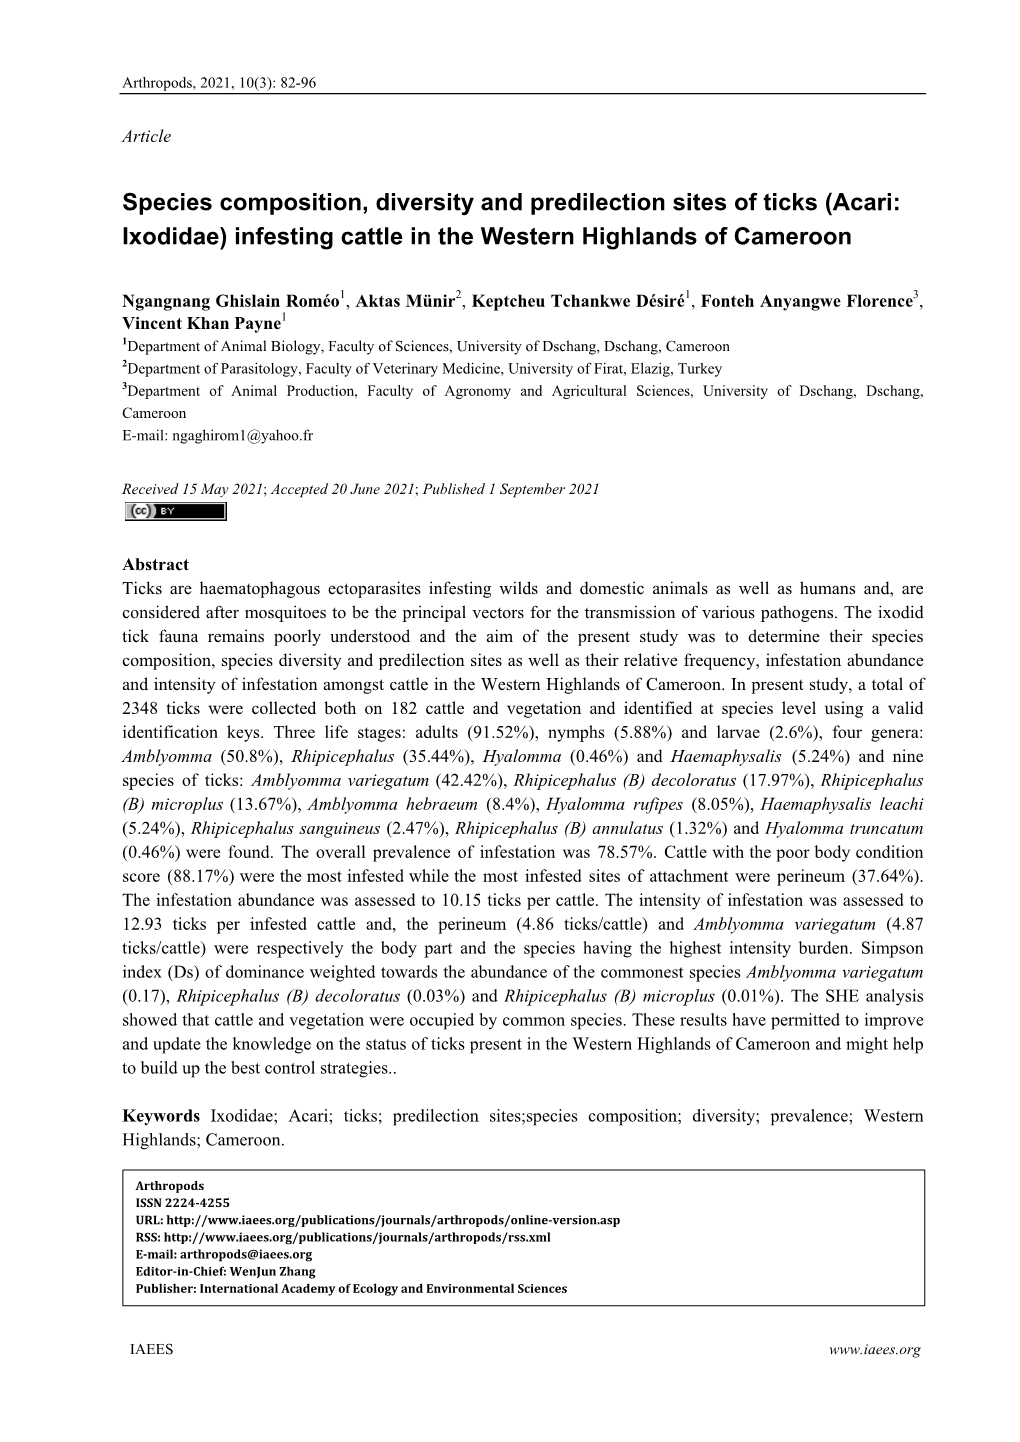 Species Composition, Diversity and Predilection Sites of Ticks (Acari: Ixodidae) Infesting Cattle in the Western Highlands of Cameroon